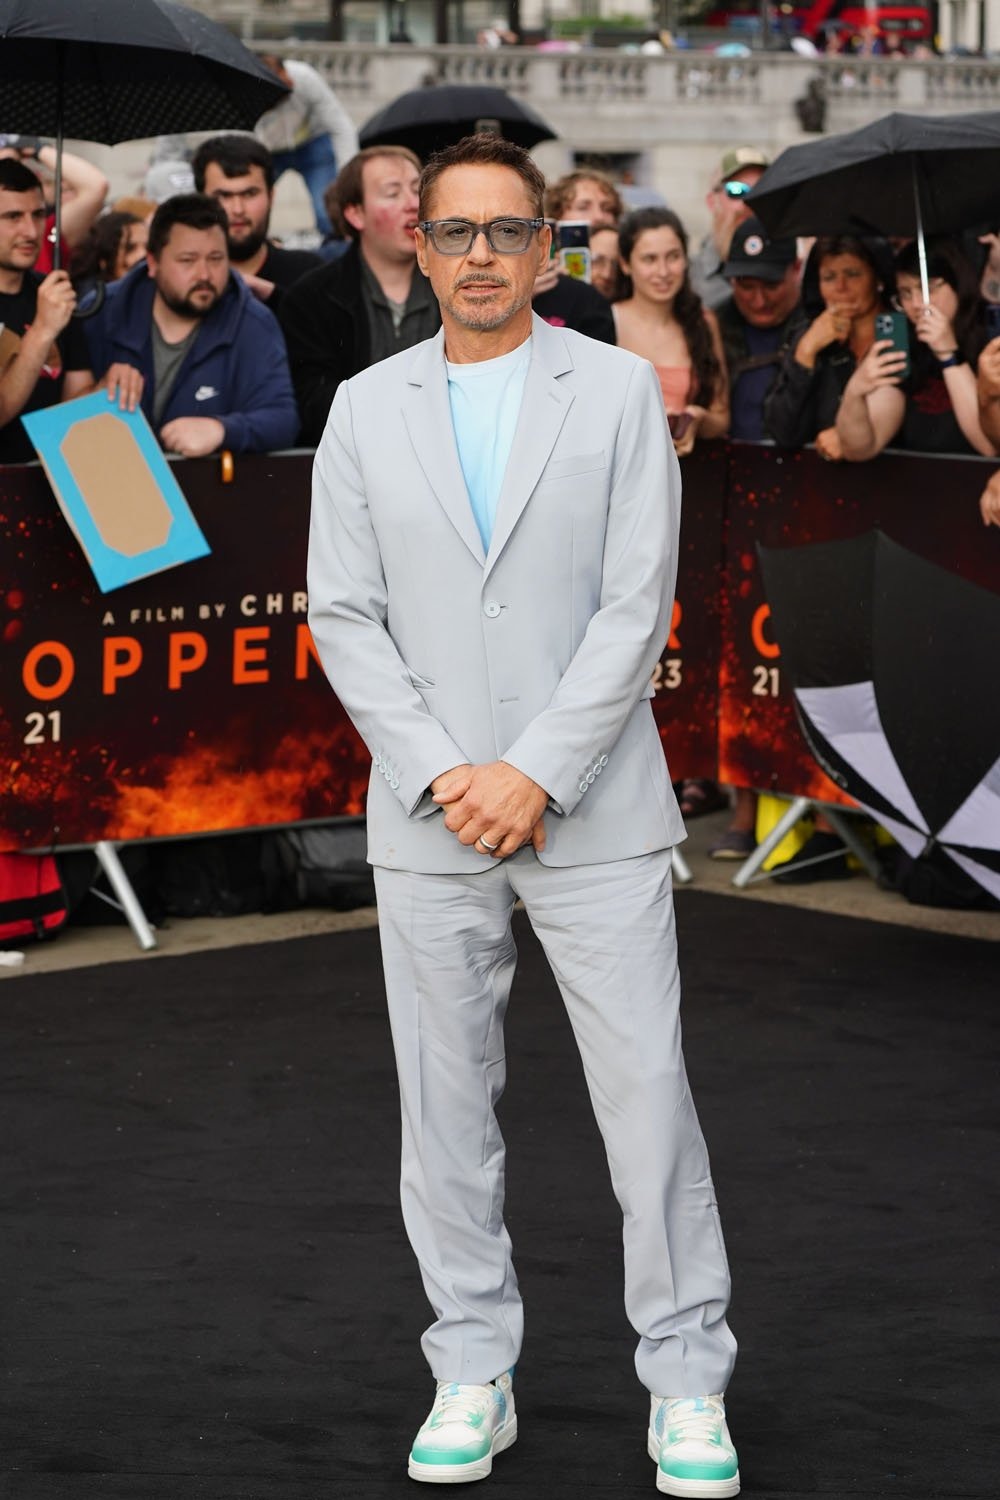 Robert Downey Jr. at the photo call for the film 'Oppenheimer' on Wednesday, July 12, 2023 in London.